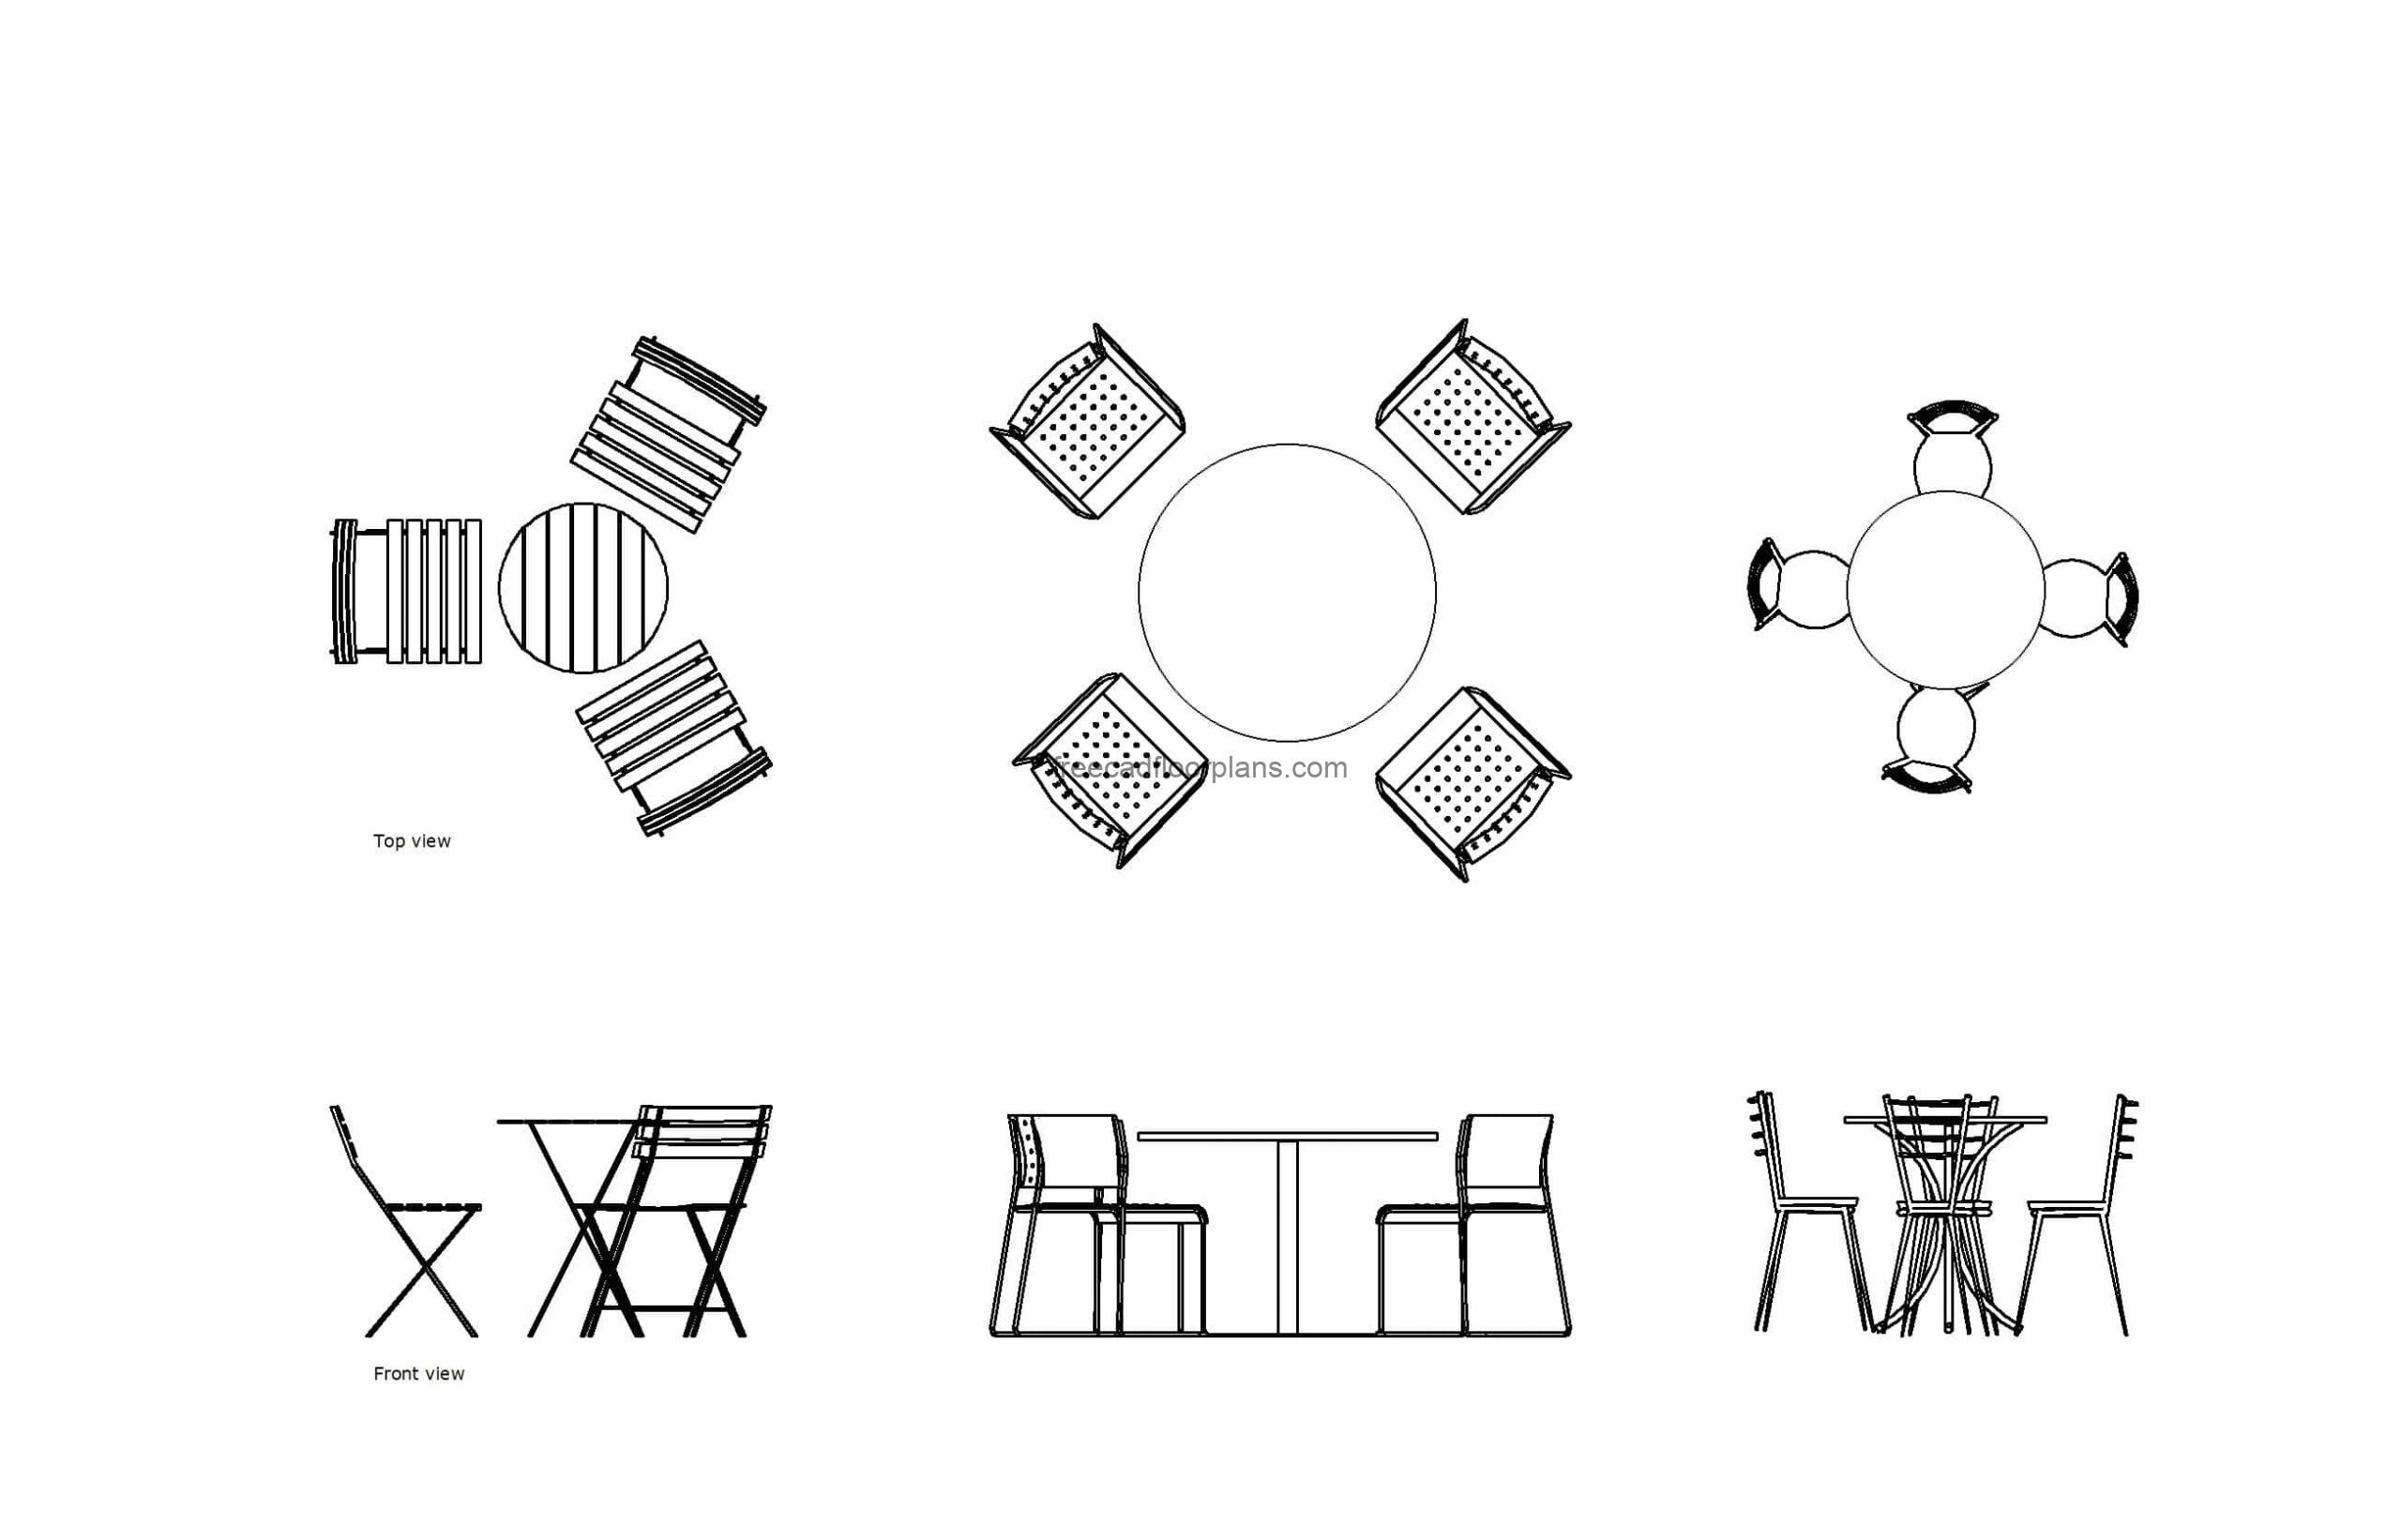 autocad drawing of different table sets, plan and elevation 2d views, dwg file free for download